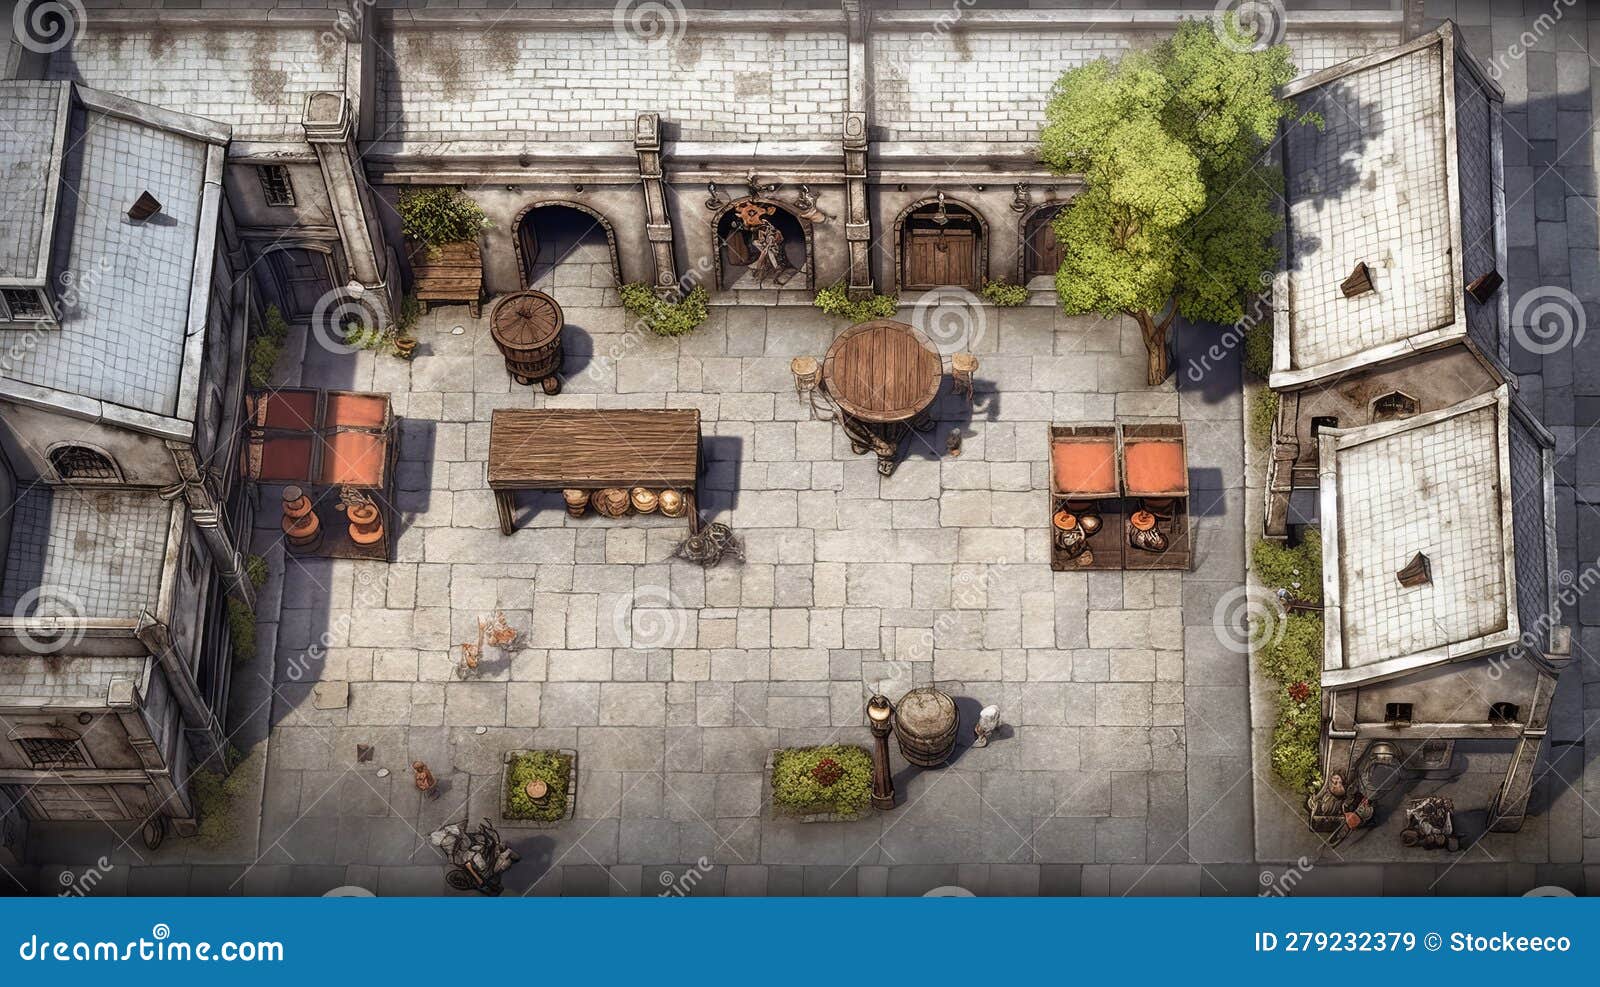 conurbation battlemap of small city street with marketplace